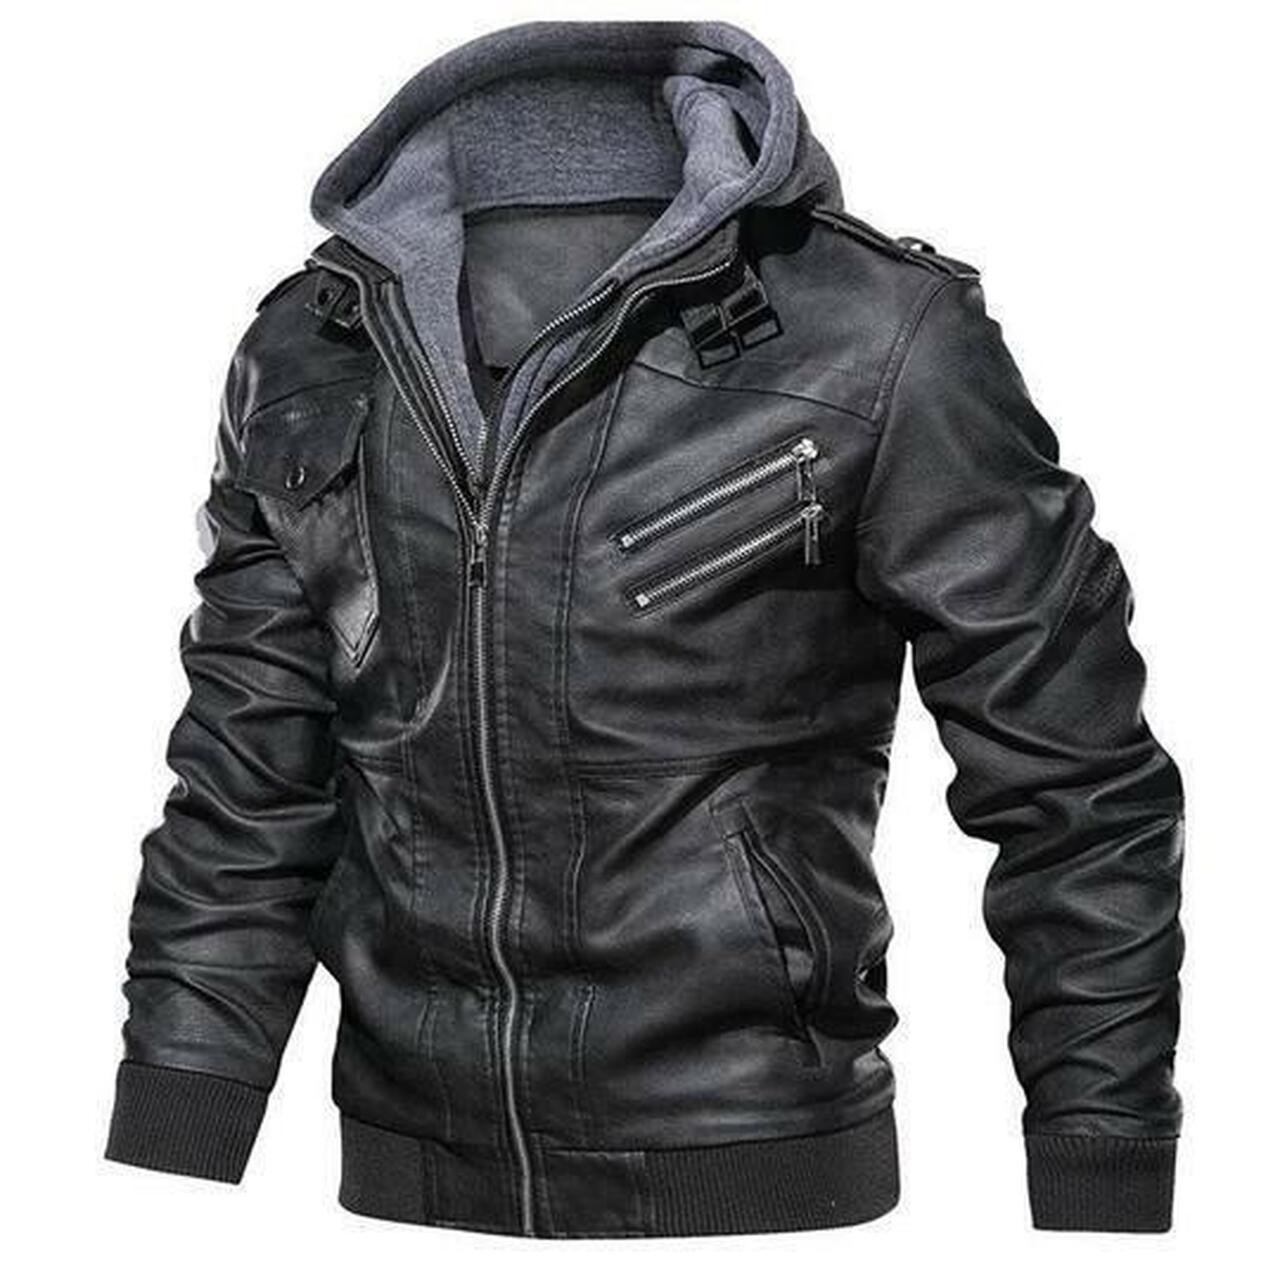 If you're looking for a new leather jacket this season - keep reading! 27